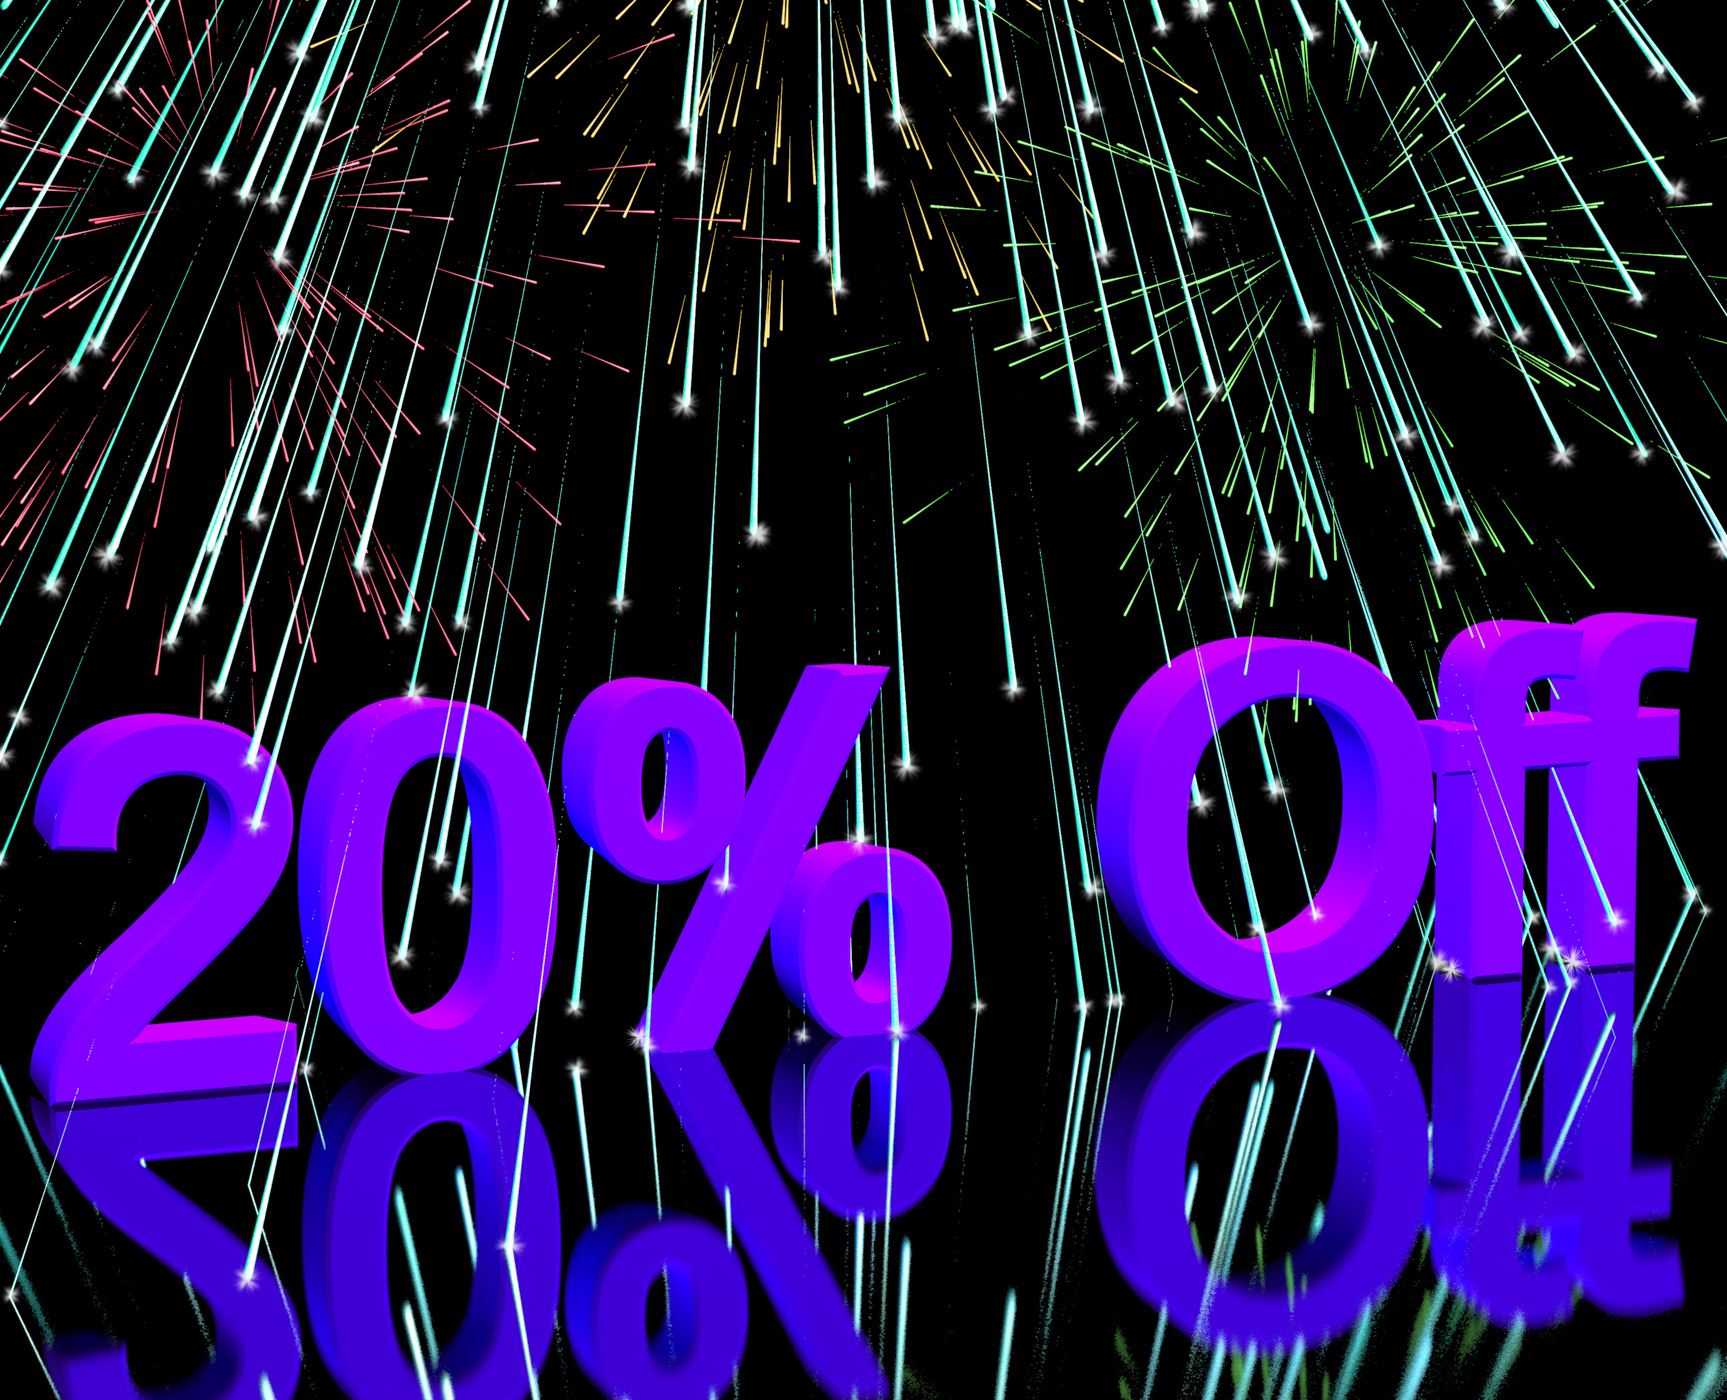 20 Off With Fireworks Showing Sale Discount Of Twenty Percent, 20, Percent, Sellout, Savings, HQ Photo